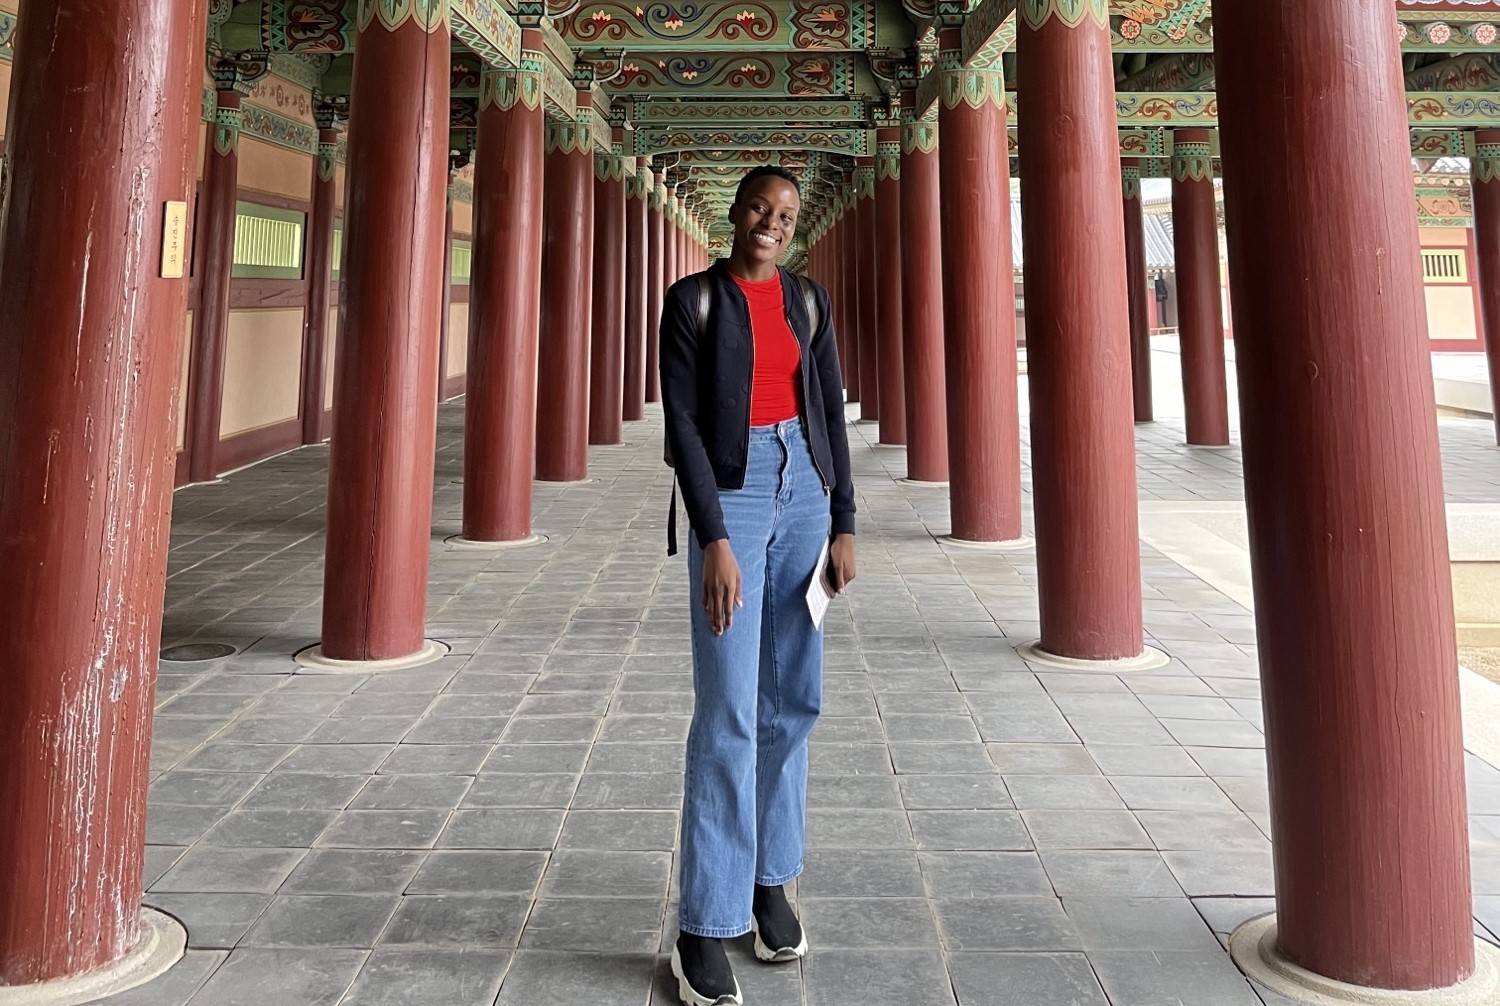 Black woman posing in front of a pagoda